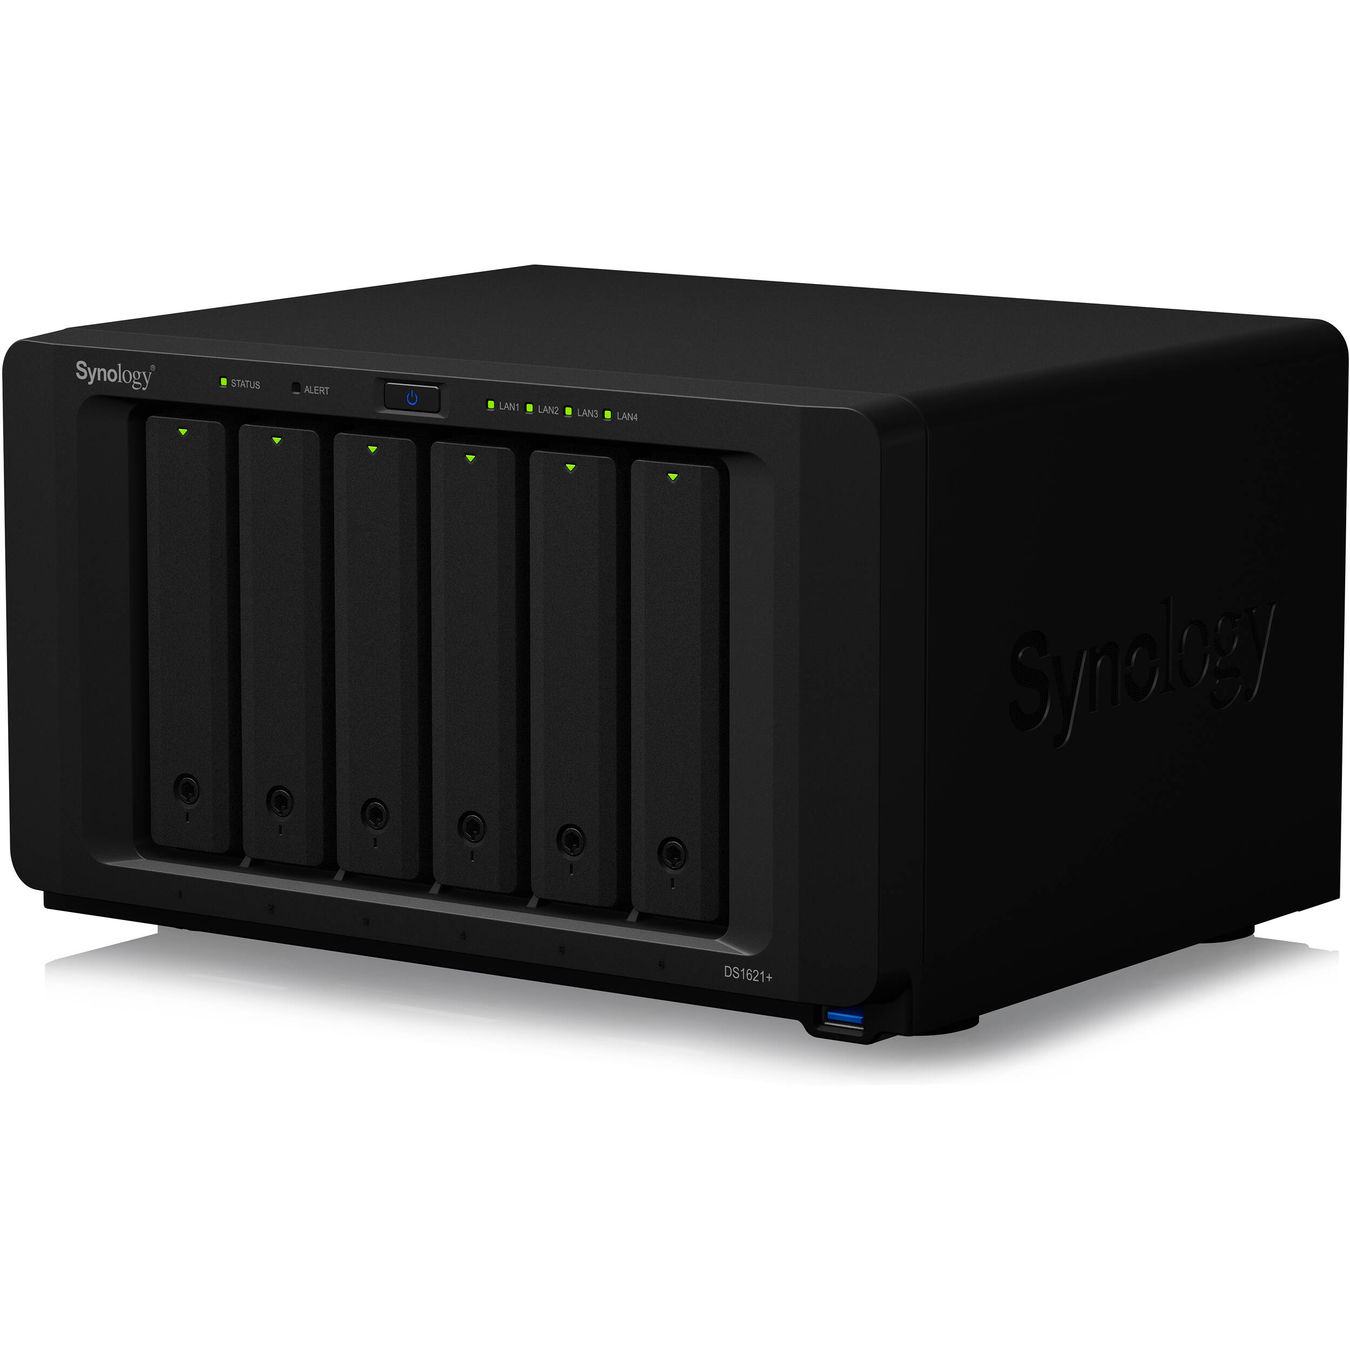 Synology-ds1621plus-front-left